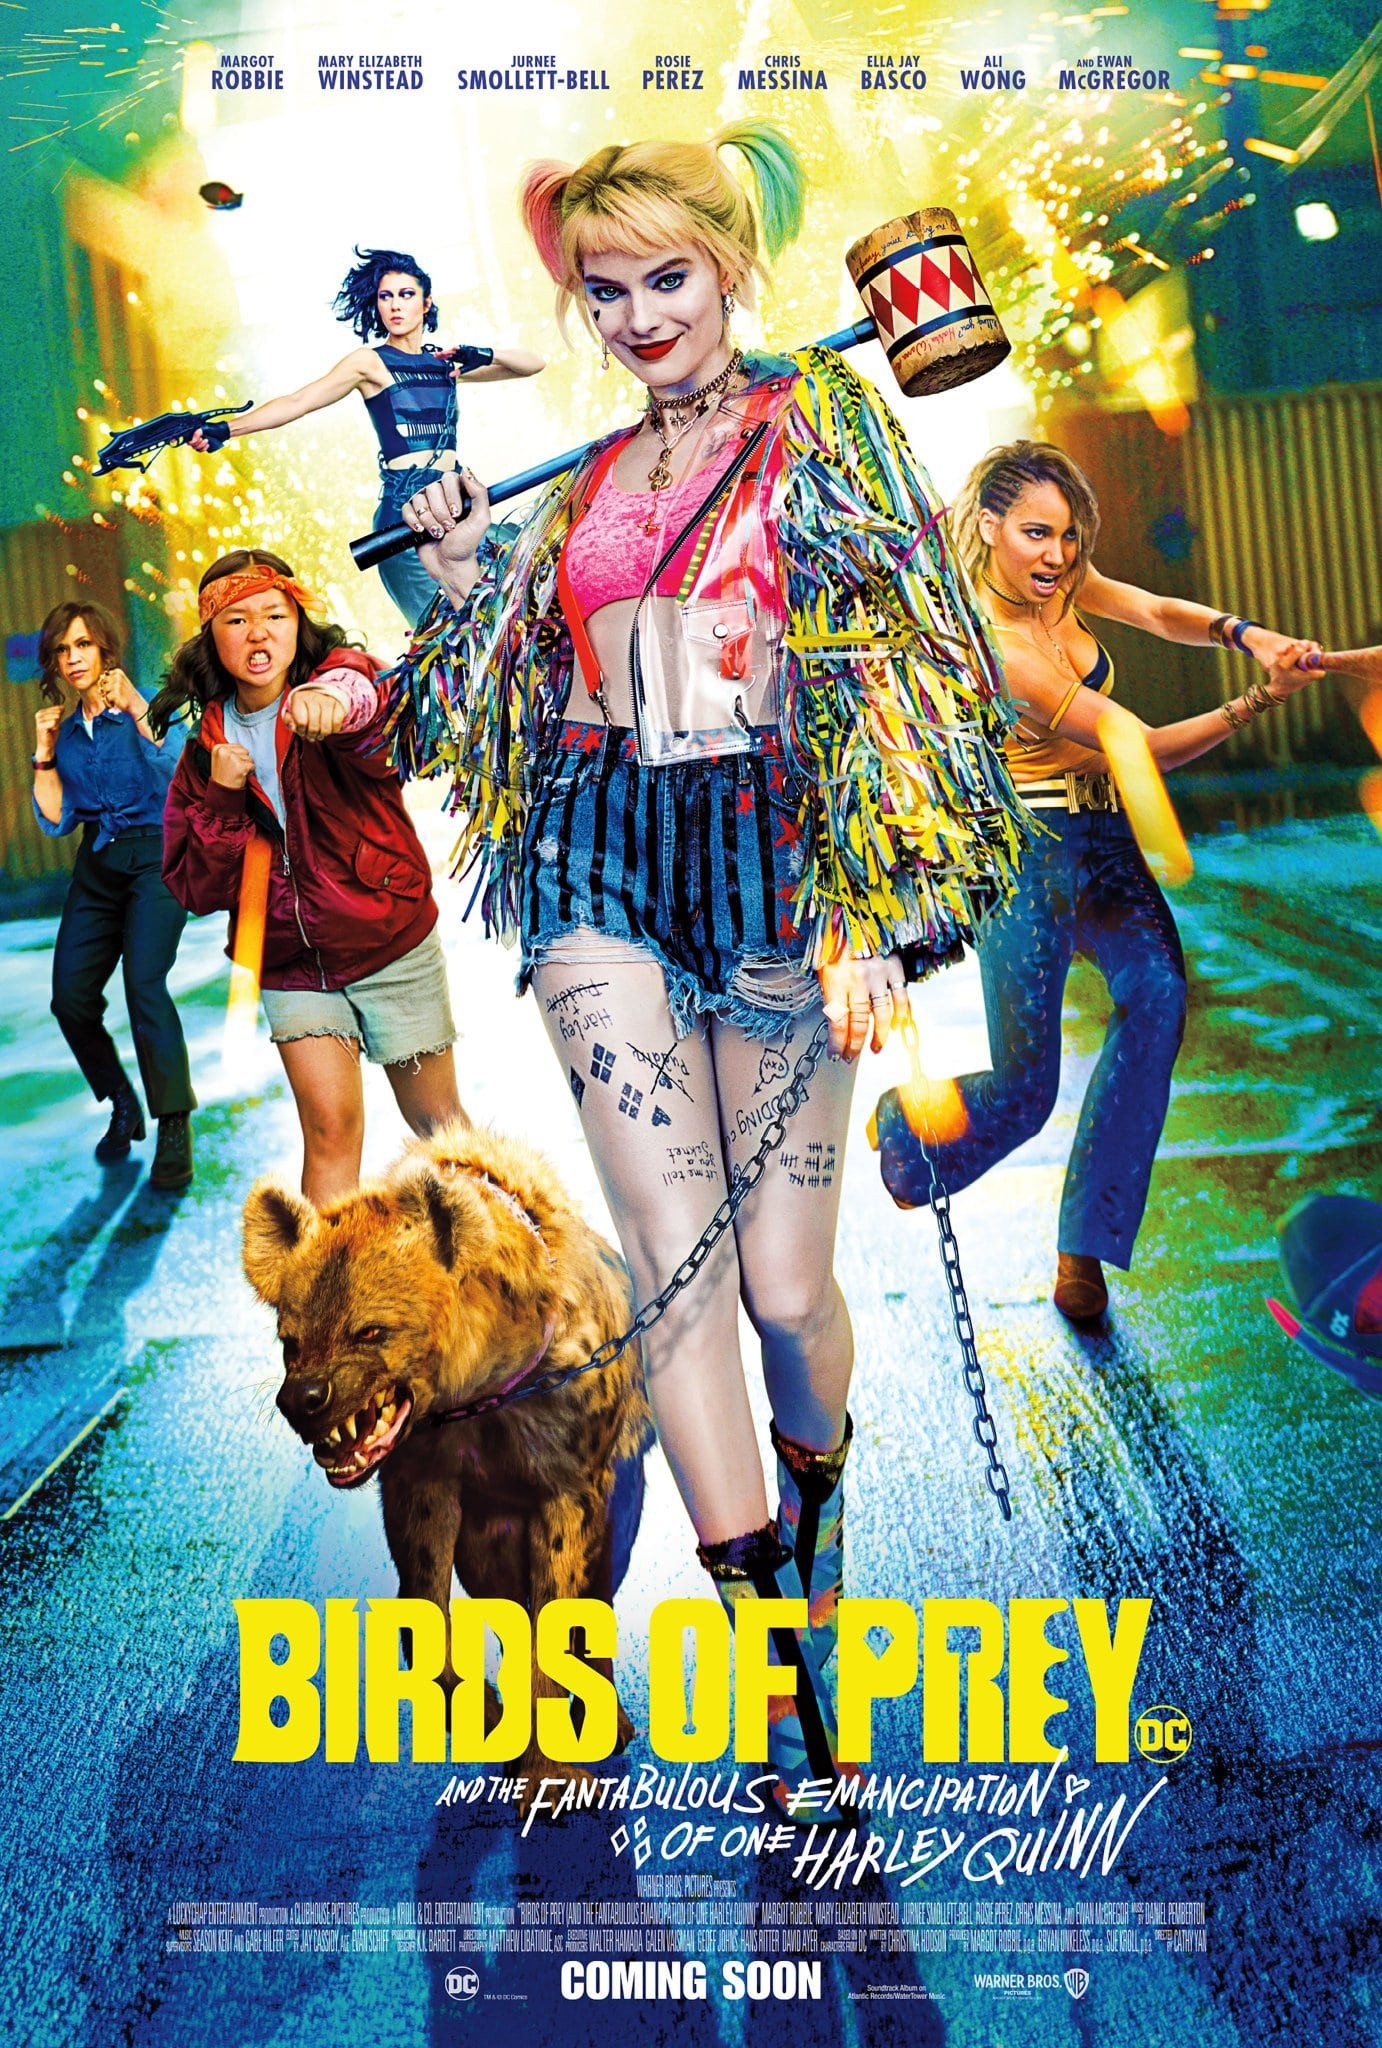 BIRDS OF PREY AND THE FANTABULOUS EMANCIPATION OF HARLEY QUINN MOVIE POSTER